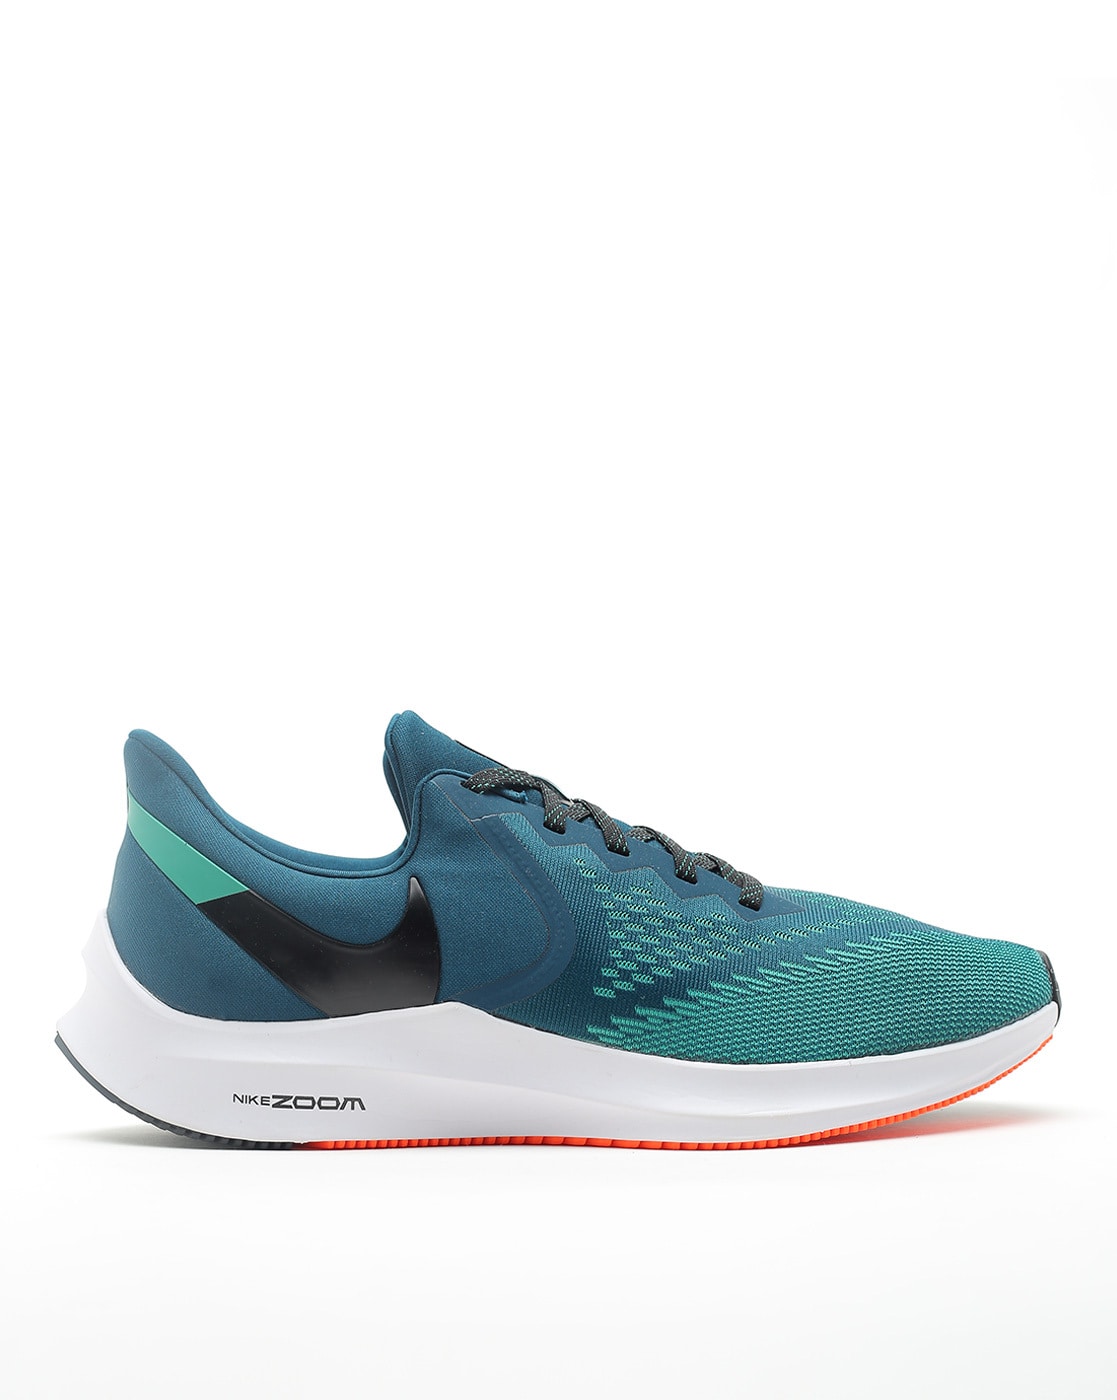 nike zoom winflo 6 price in india